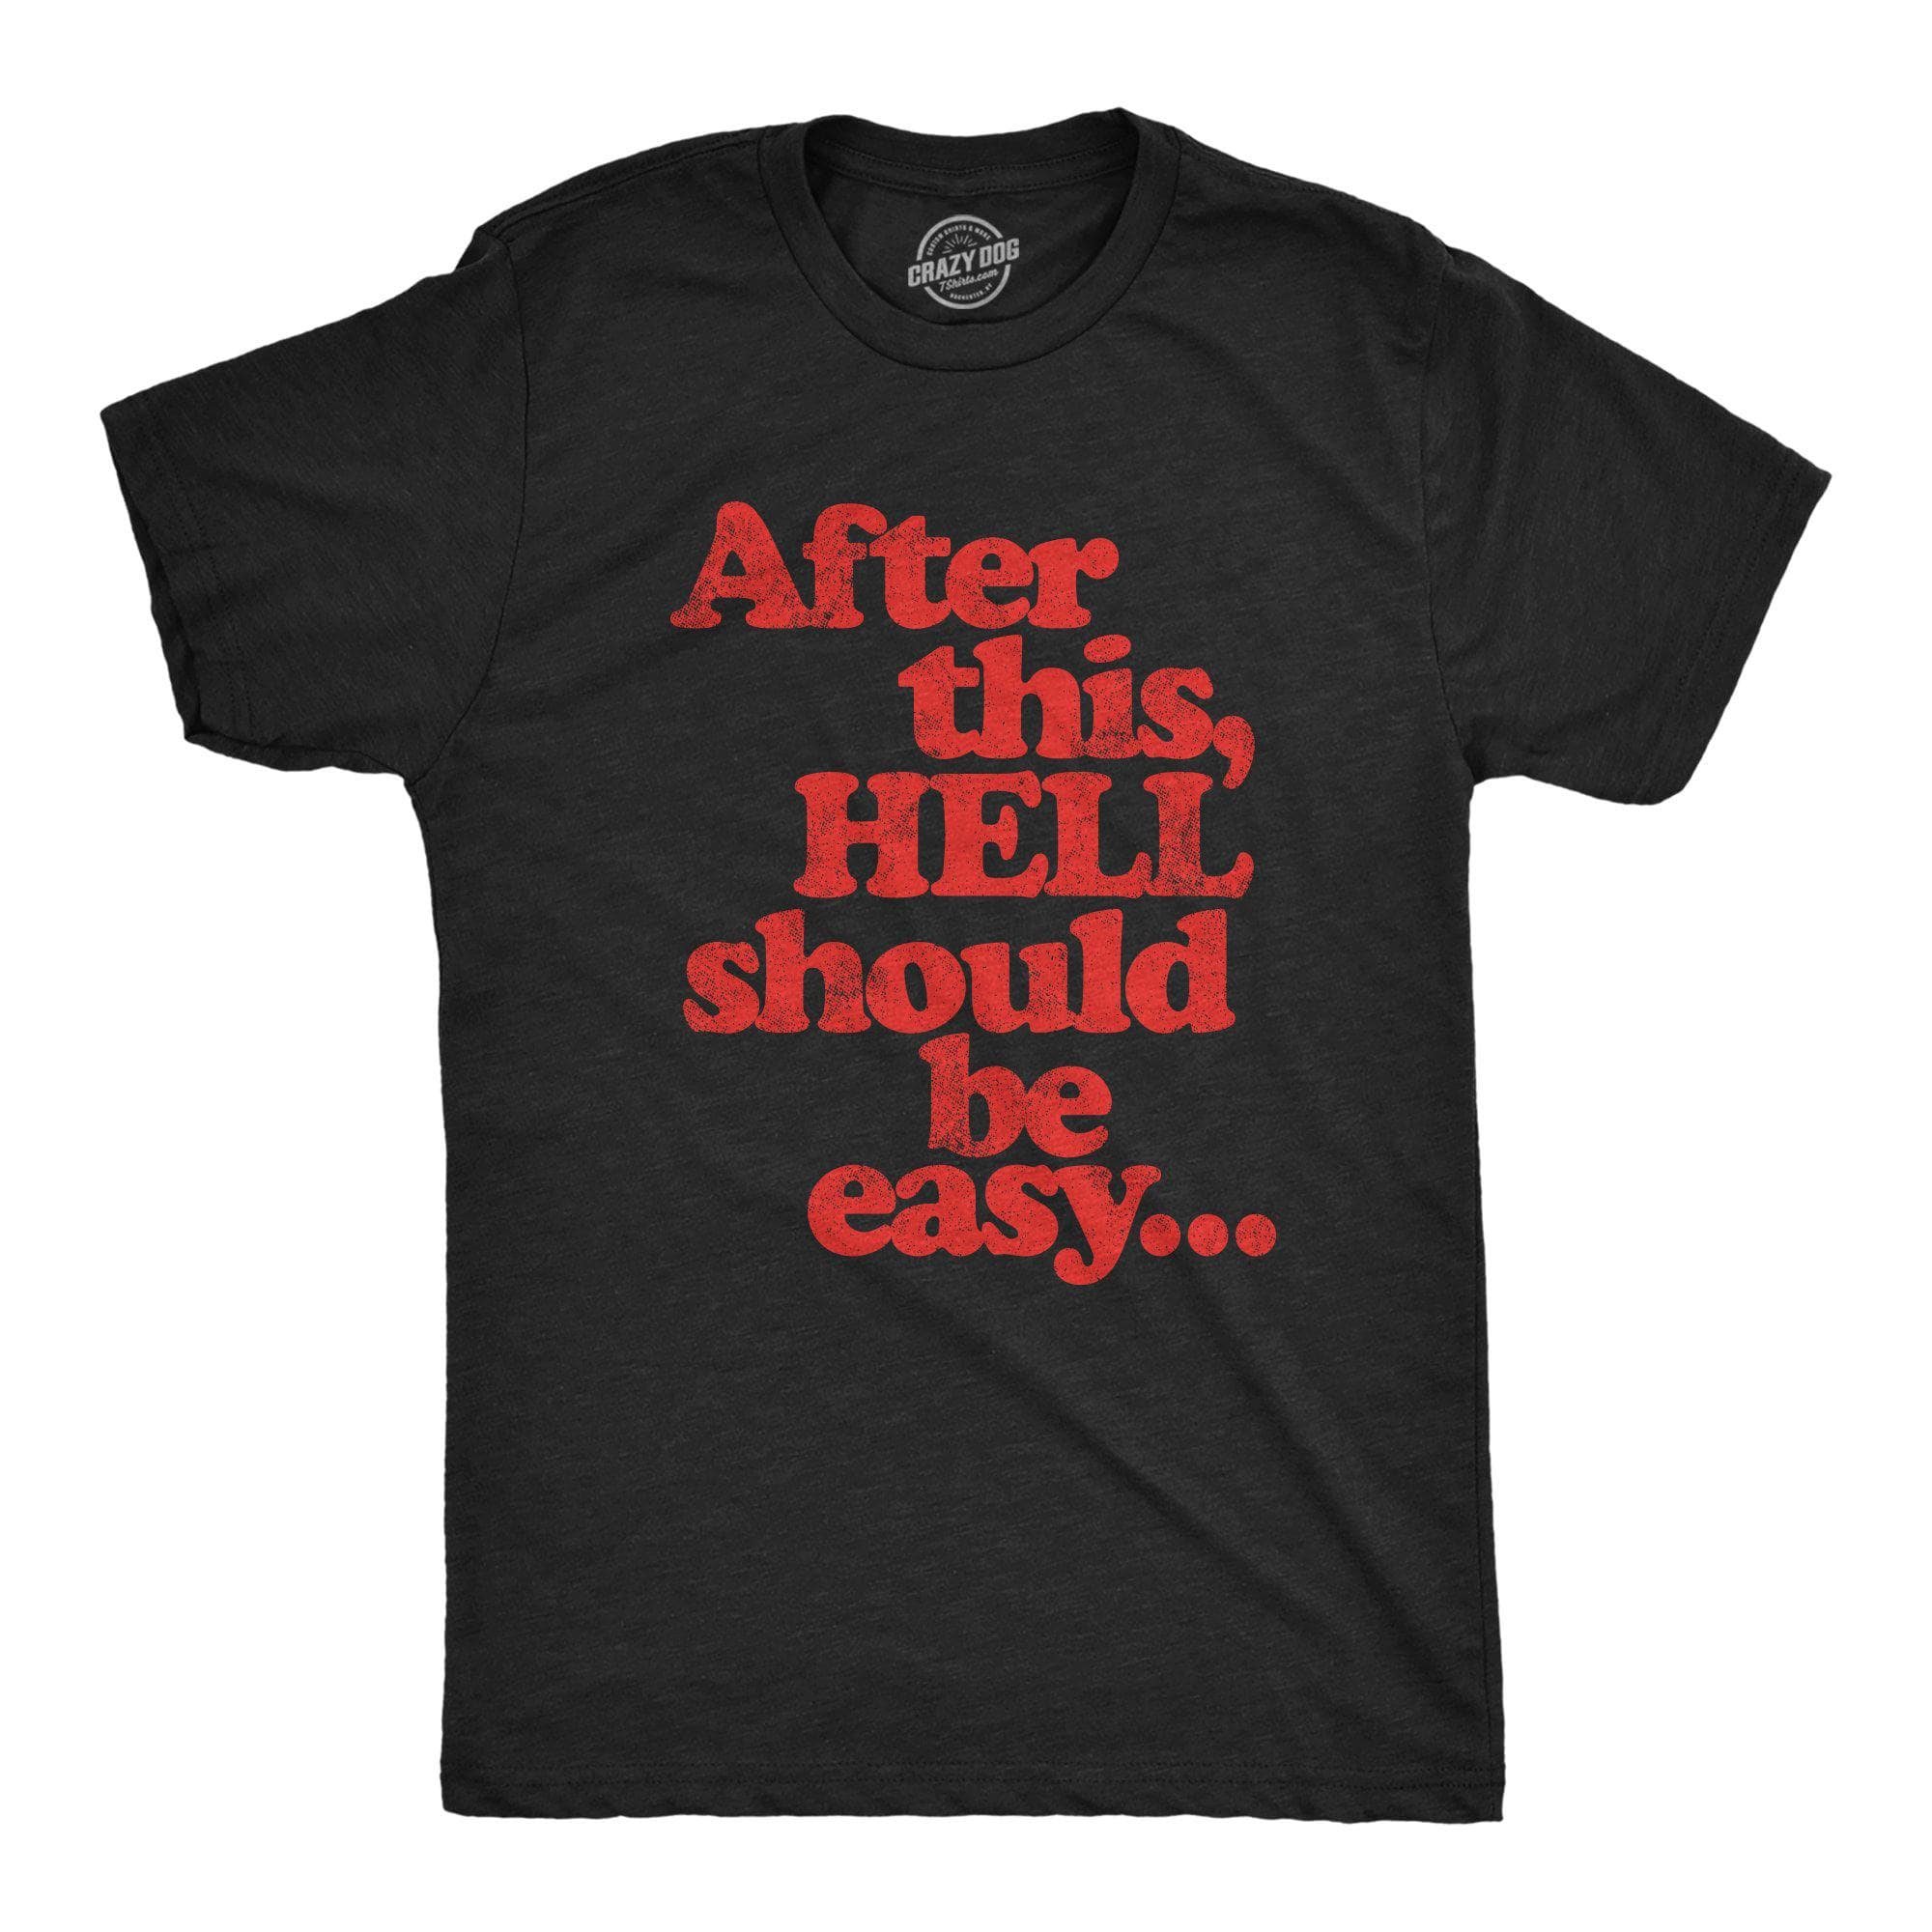 After This Hell Should Be Easy Men's Tshirt - Crazy Dog T-Shirts